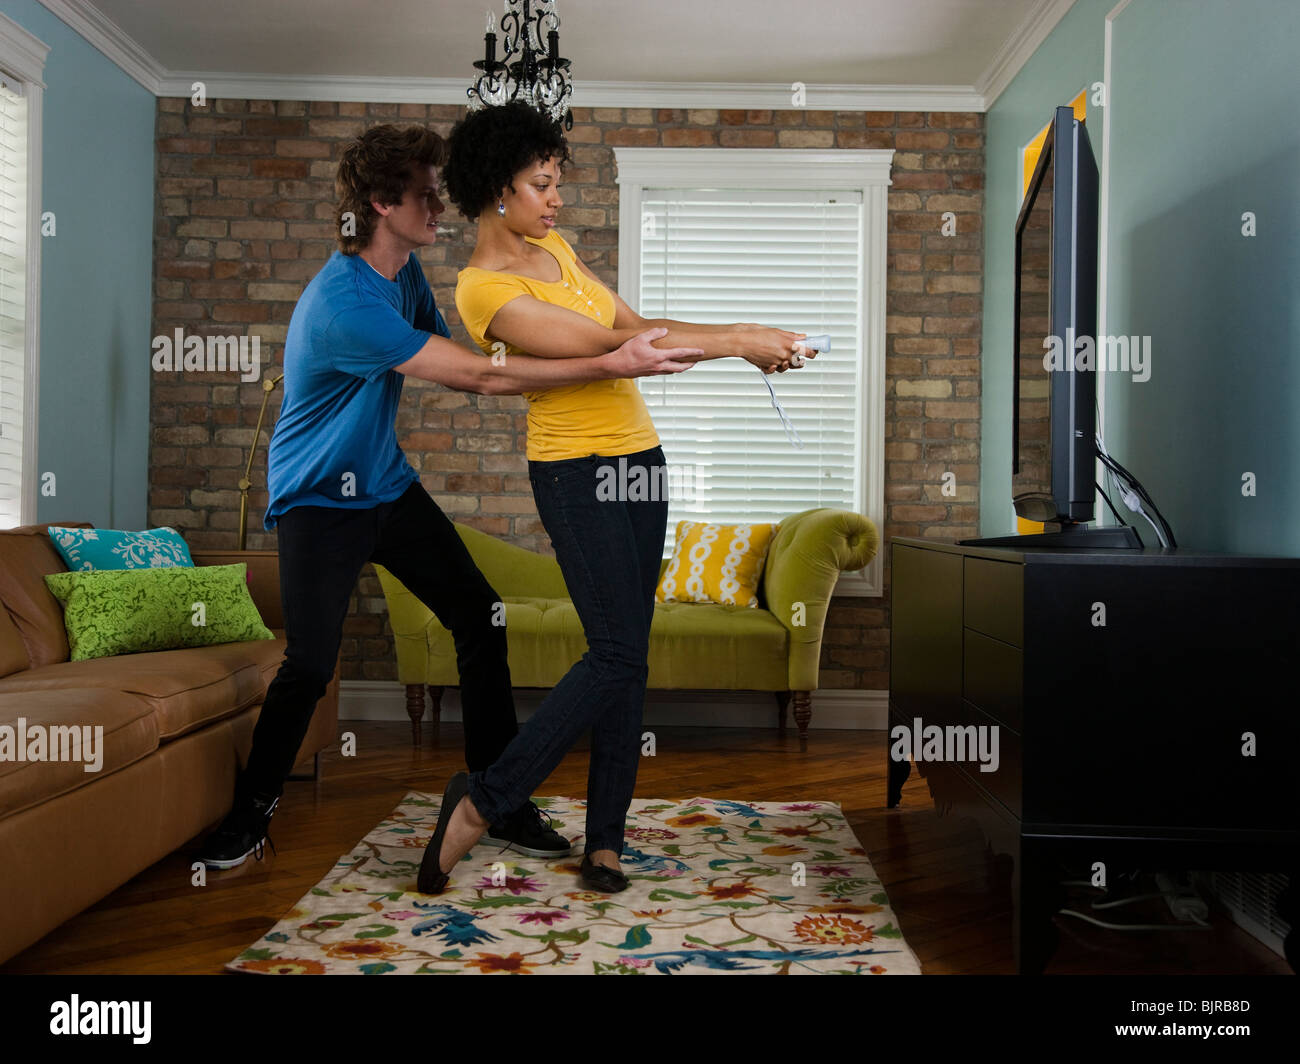 USA, Utah, Provo, young couple using remote control in living room Stock Photo